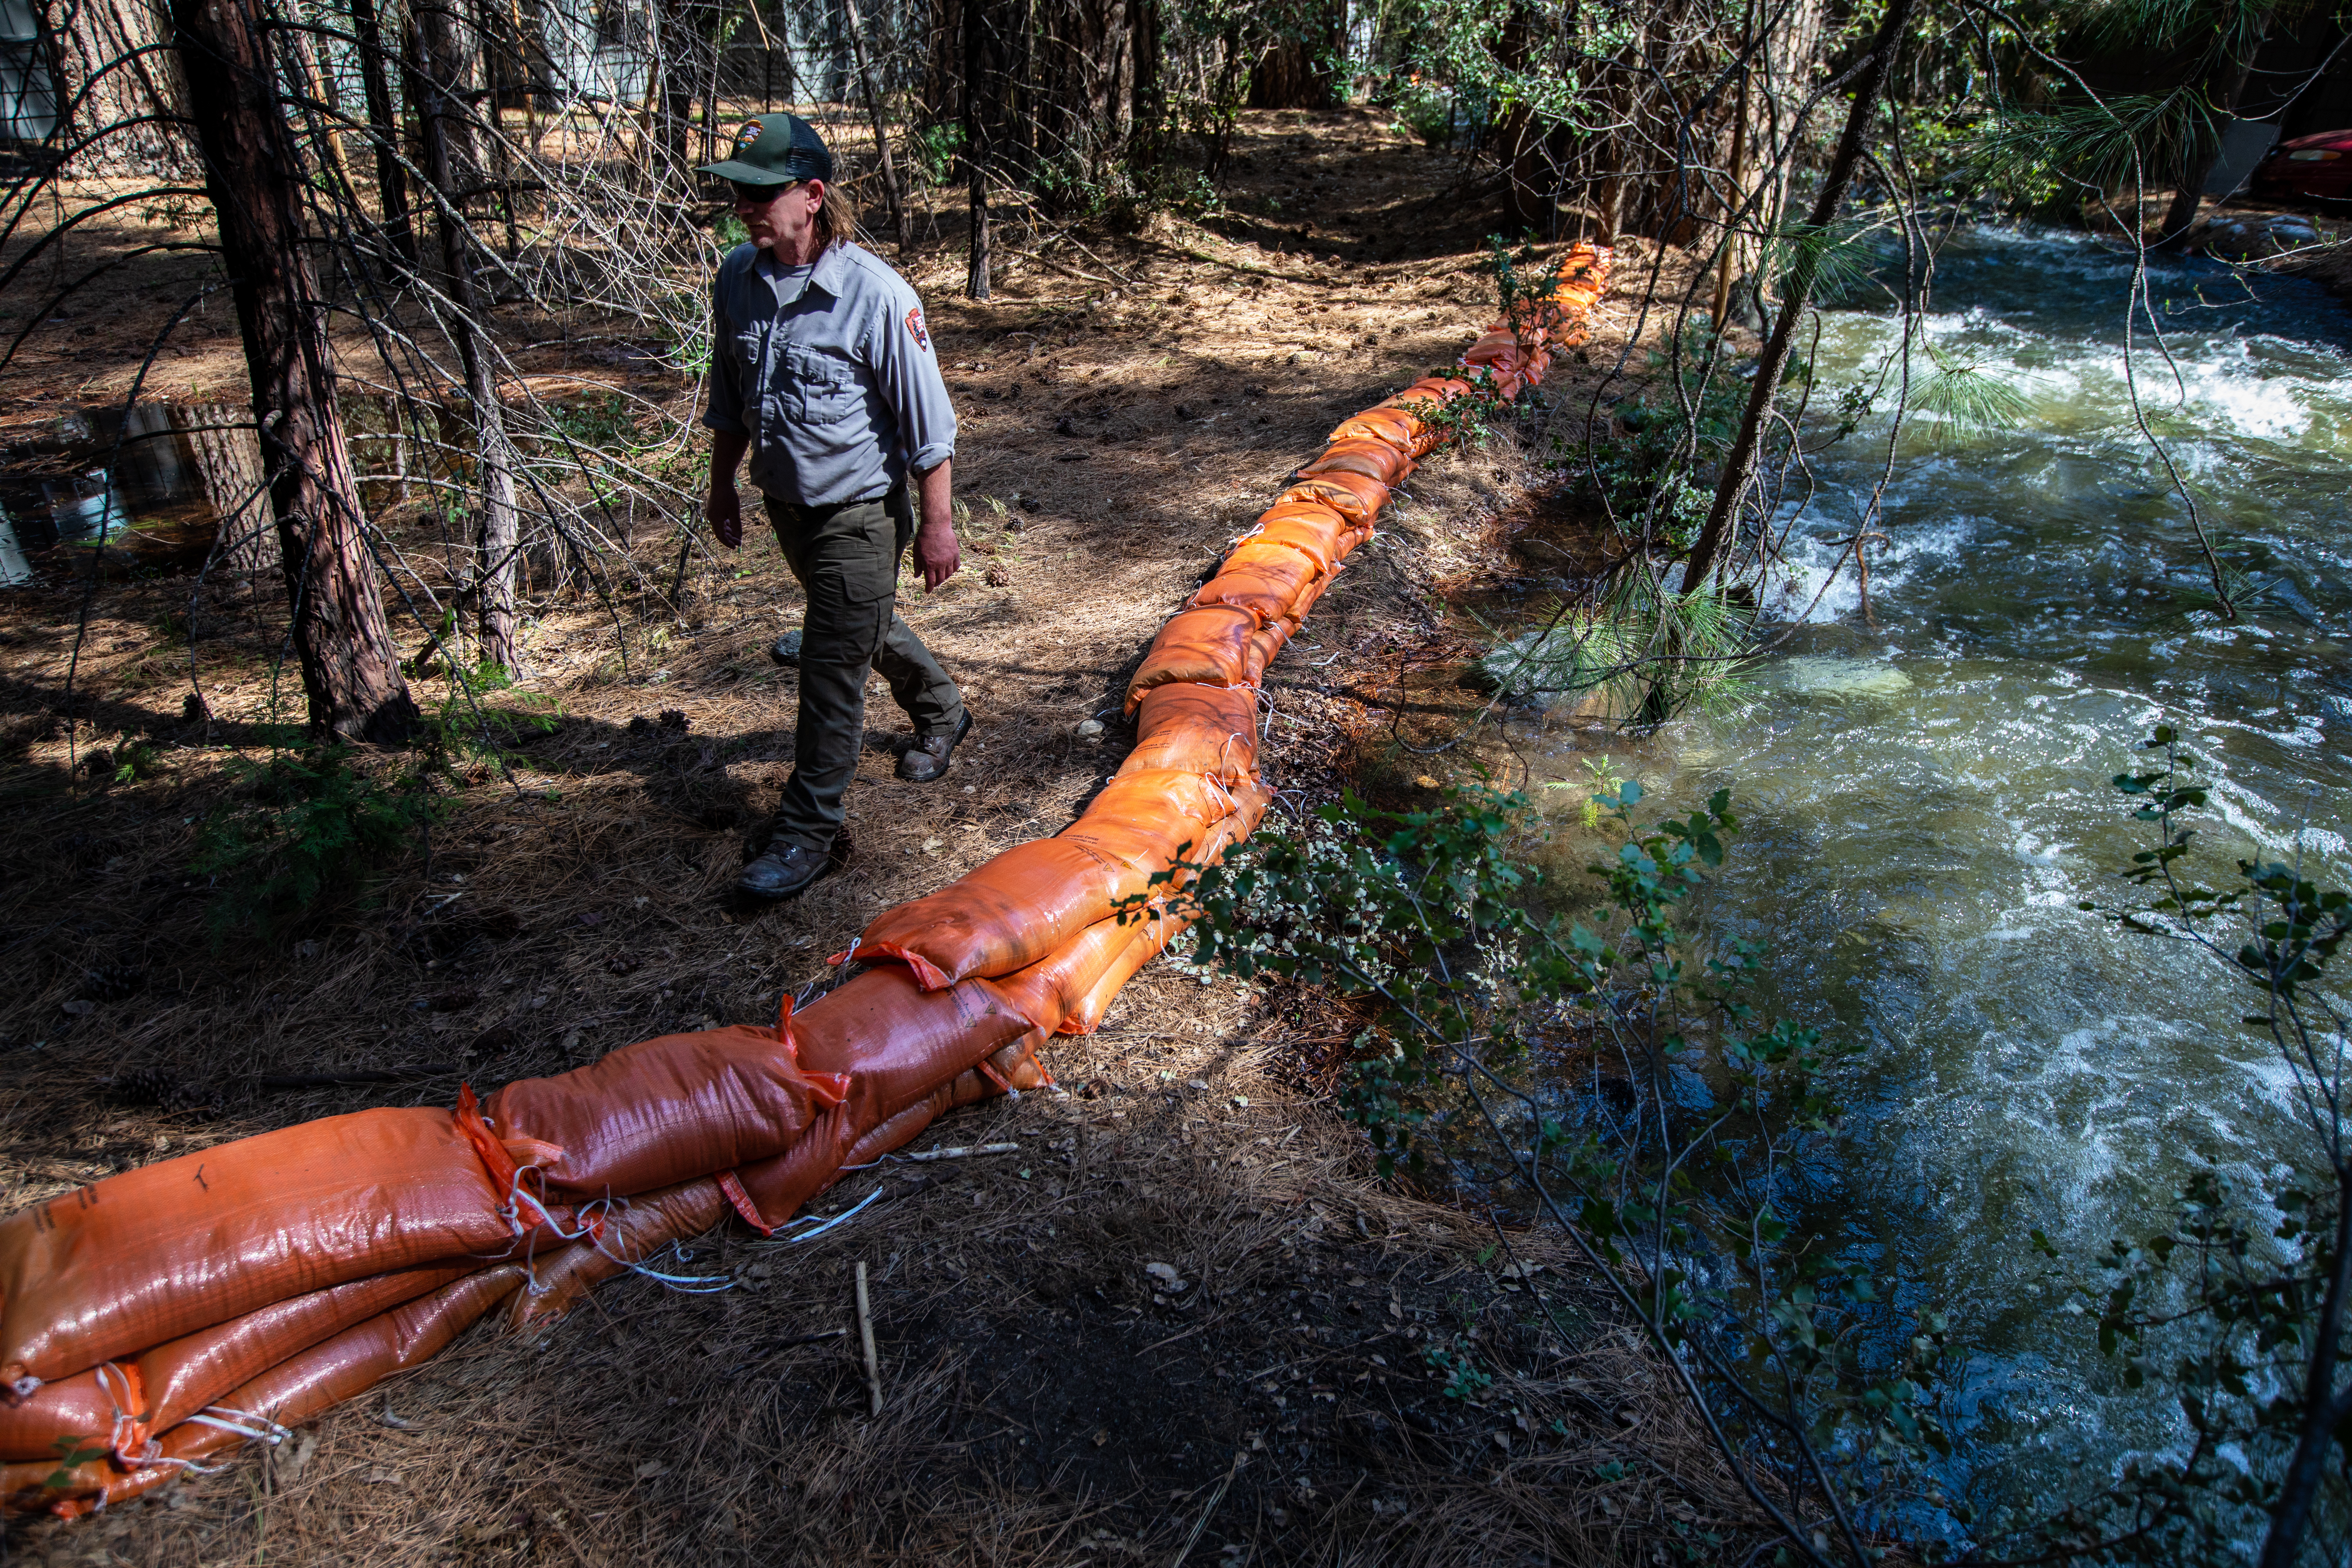 Brendan Ward with the Valley Buildings, and Groundwater Department checks the Indian Canyon Creek water level and sandbags next to staff housing below the medical clinic on Thursday, April 27, 2023, inside Yosemite National Park.